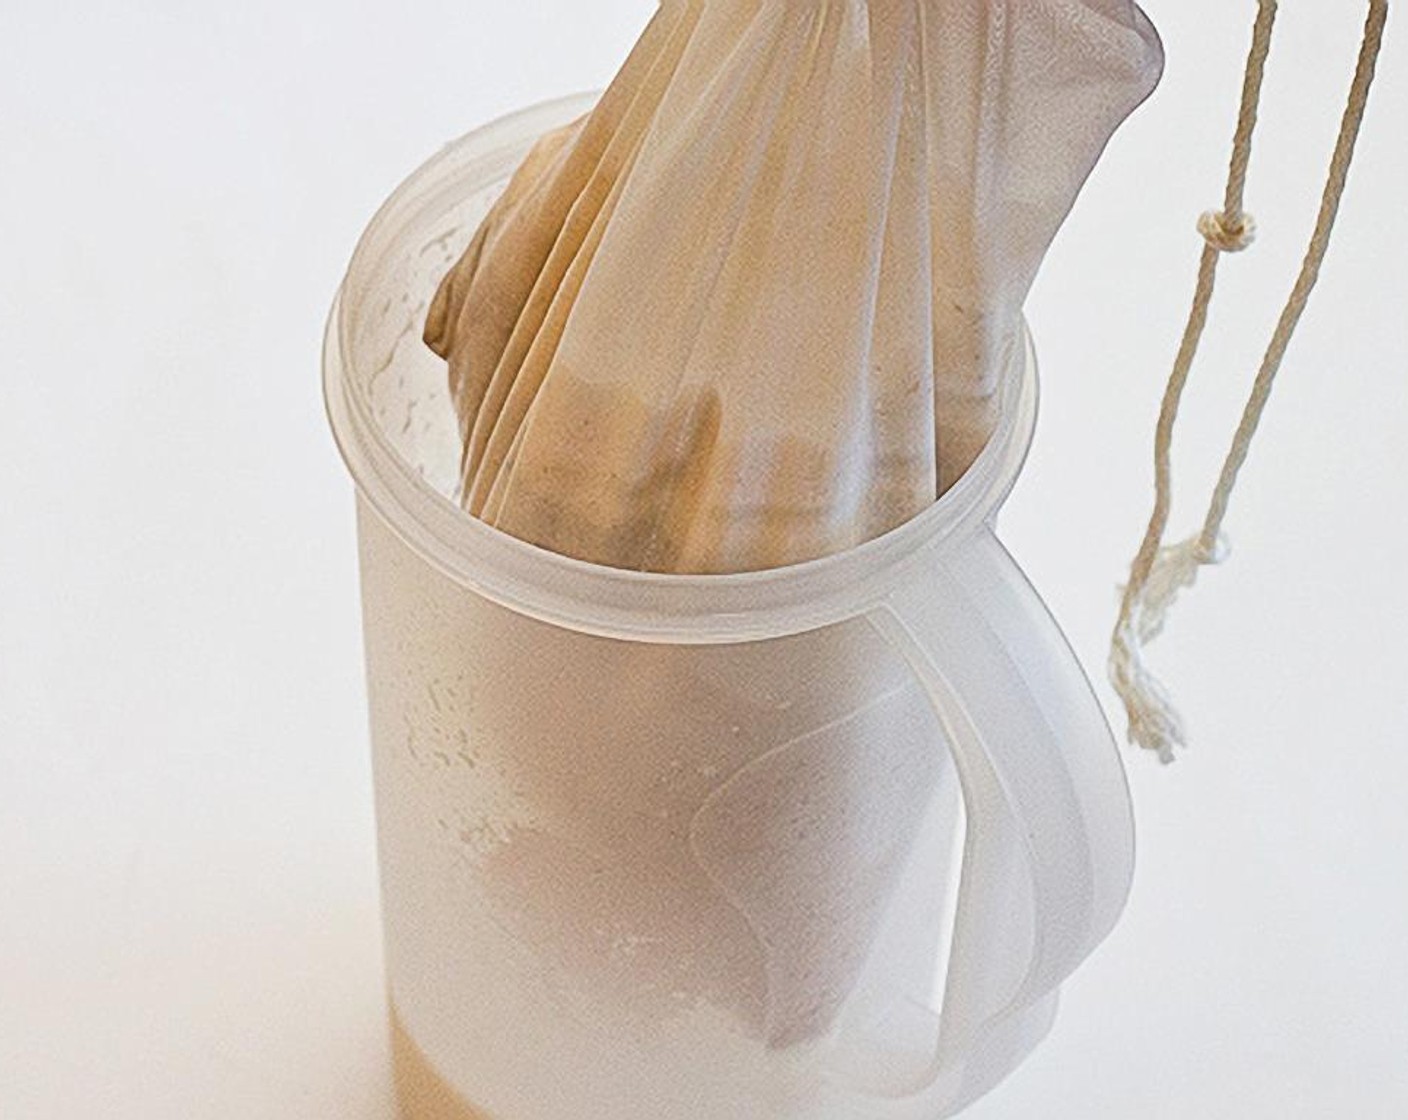 step 5 Prepare a container (pitcher, jar or wide-mouth container) and place a mesh nut milk bag or fine mesh strainer inside and pour mixture in, to strain.